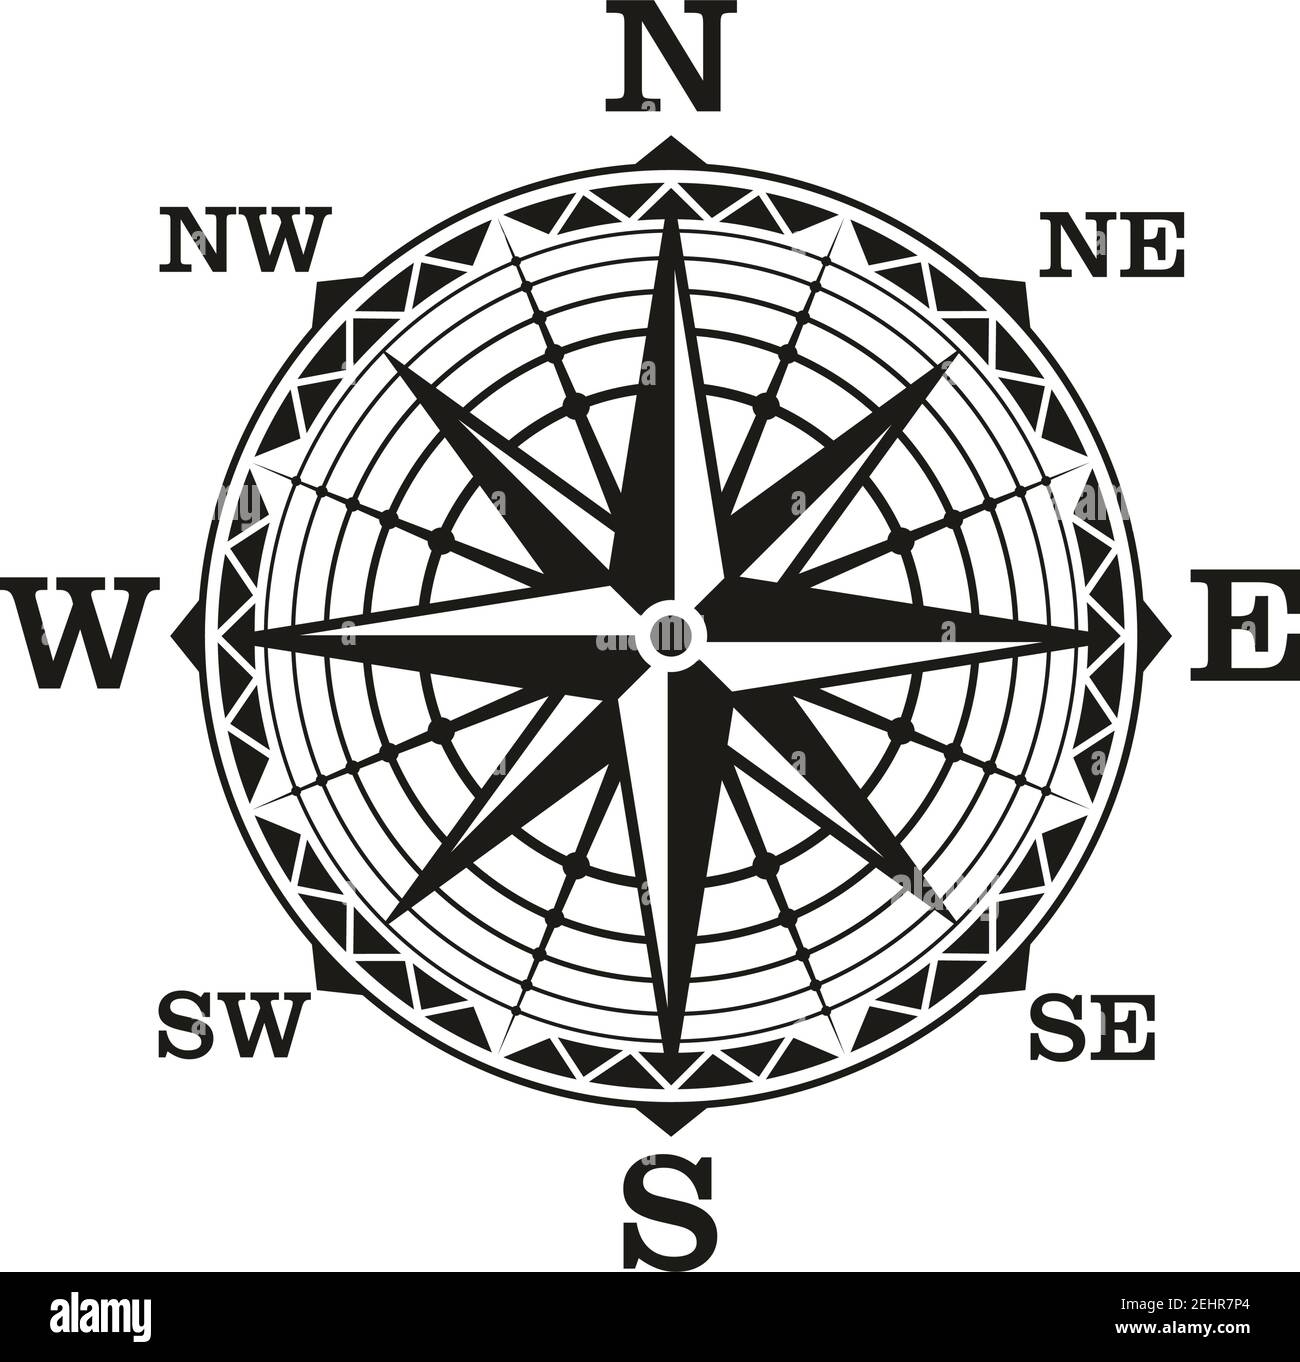 Compass wind rose, vector icon. Old vintage nautical navigation sign with star scale of north, south, east and west directions. Marine travel, adventu Stock Vector